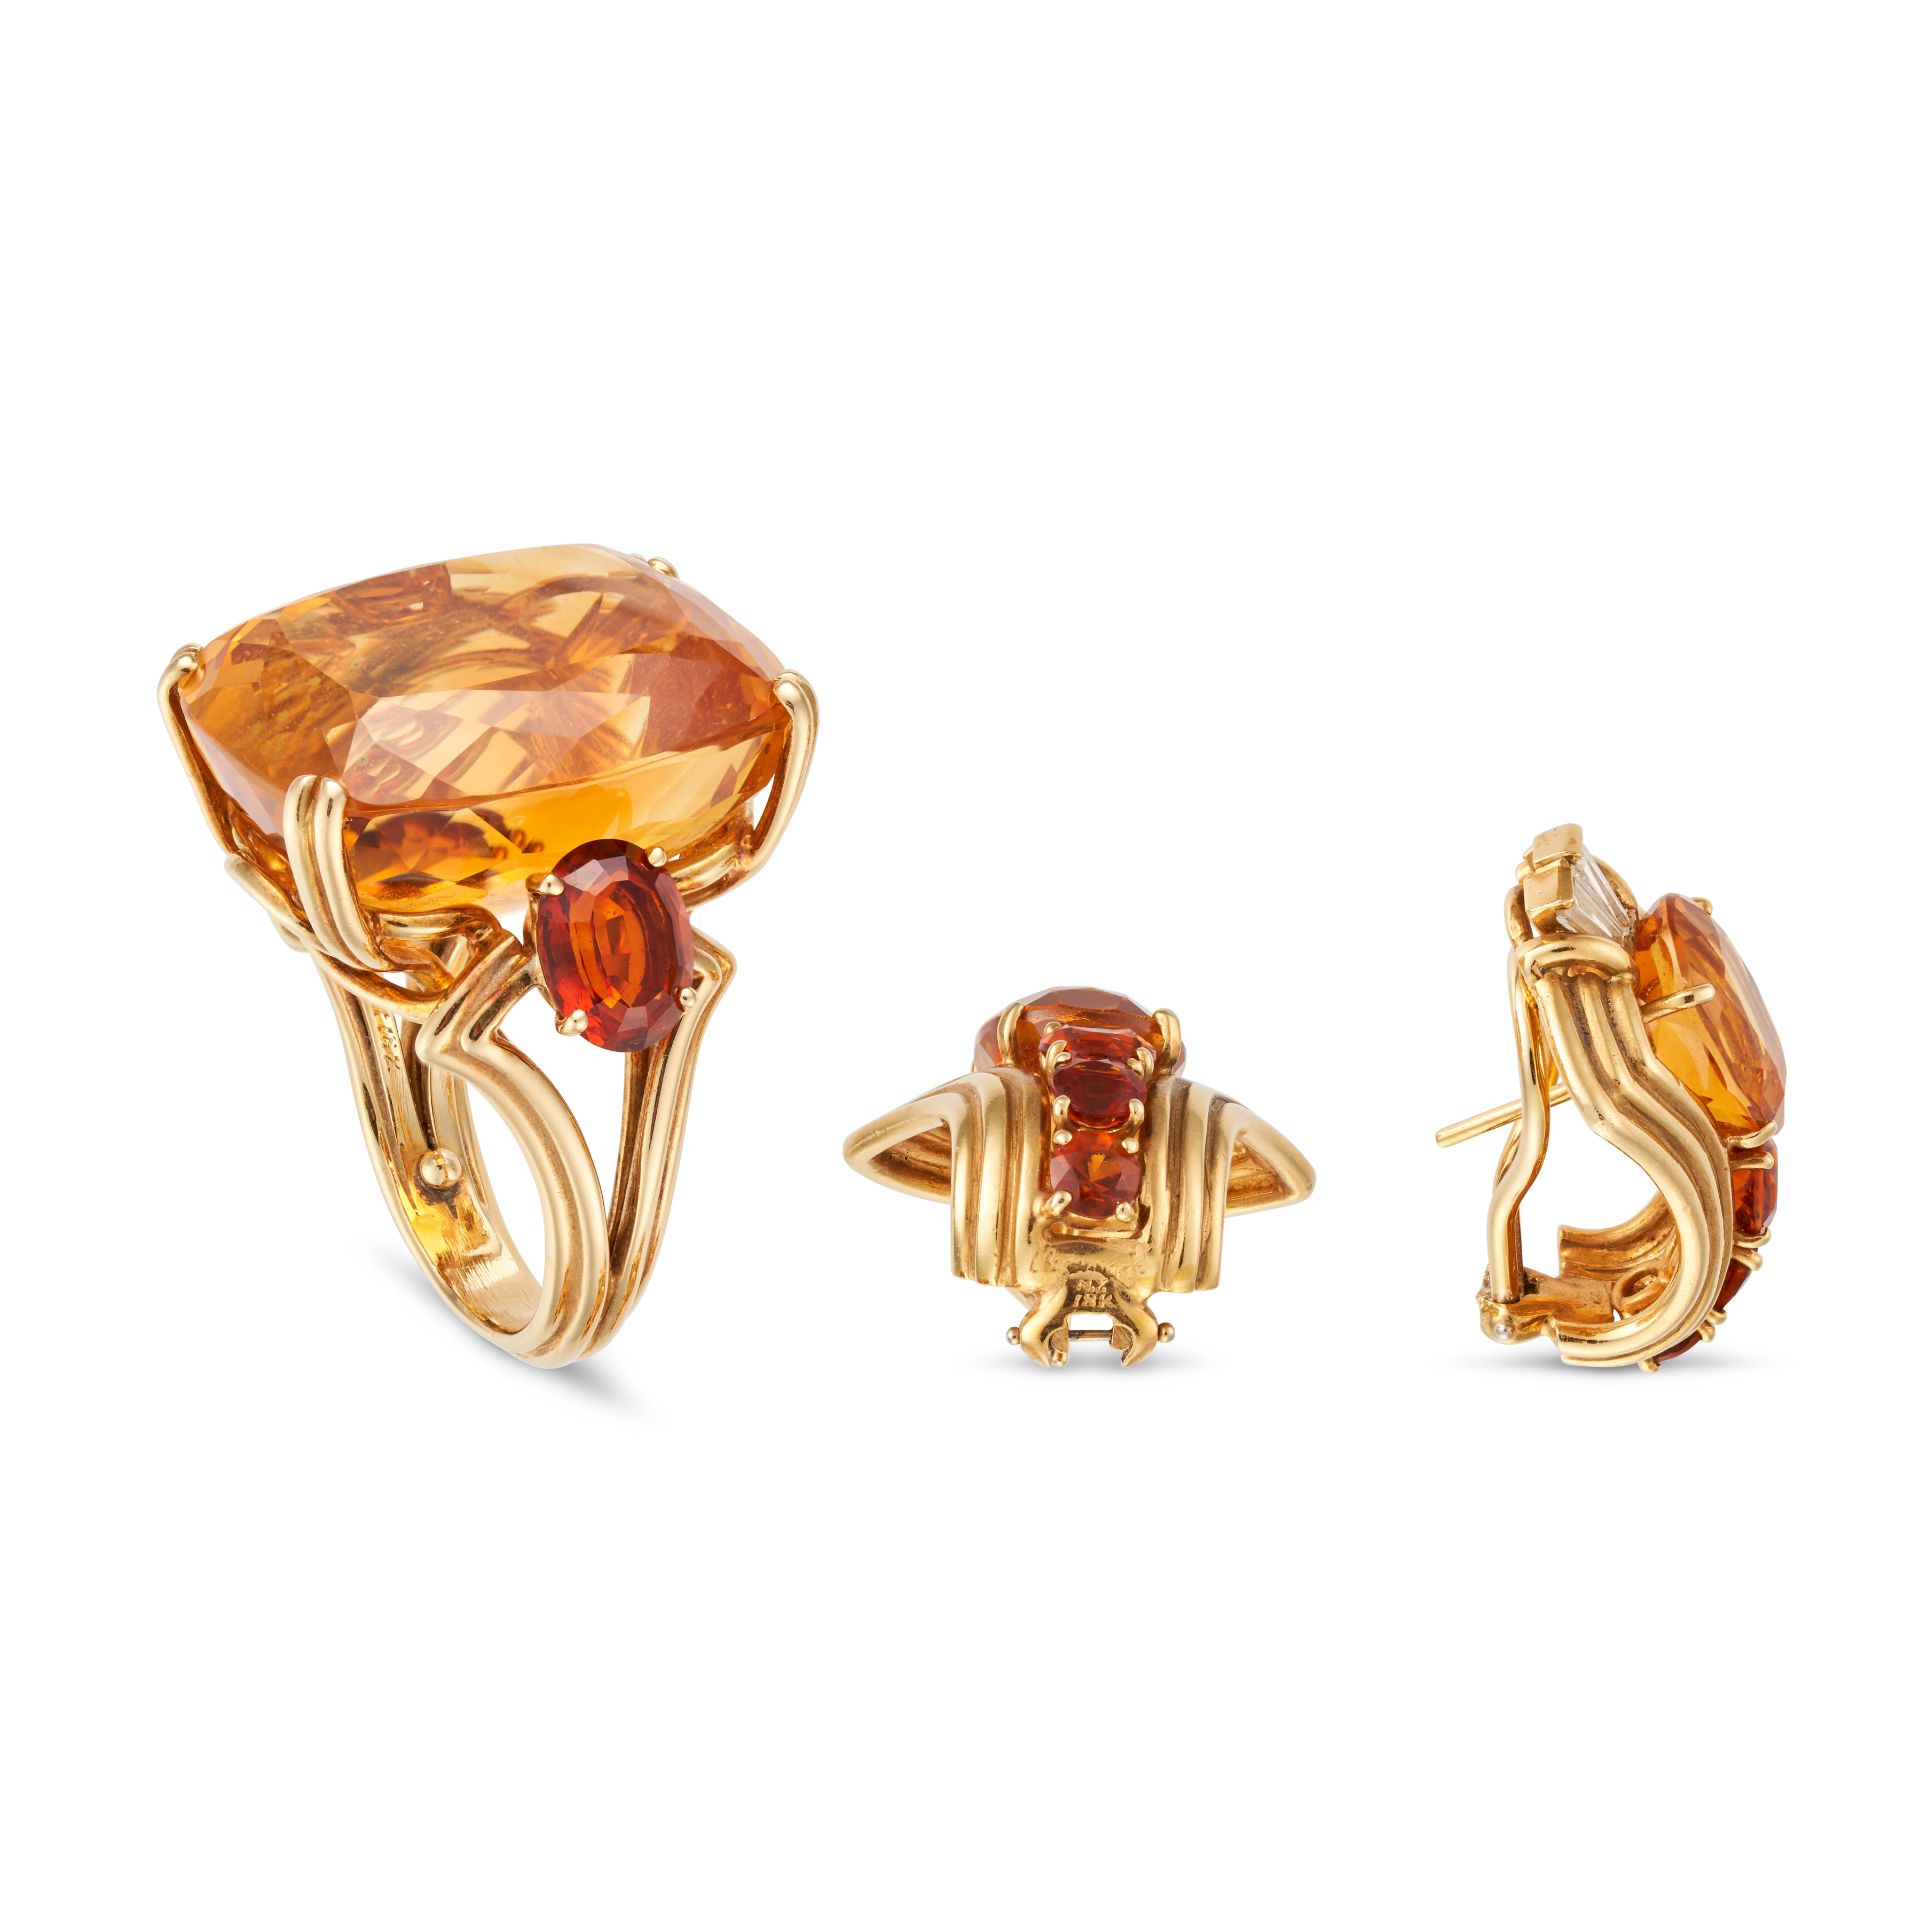 CHAUMET, A VINTAGE CITRINE AND DIAMOND RING AND EARRINGS SET in 18ct yellow gold, the earrings se... - Image 2 of 2